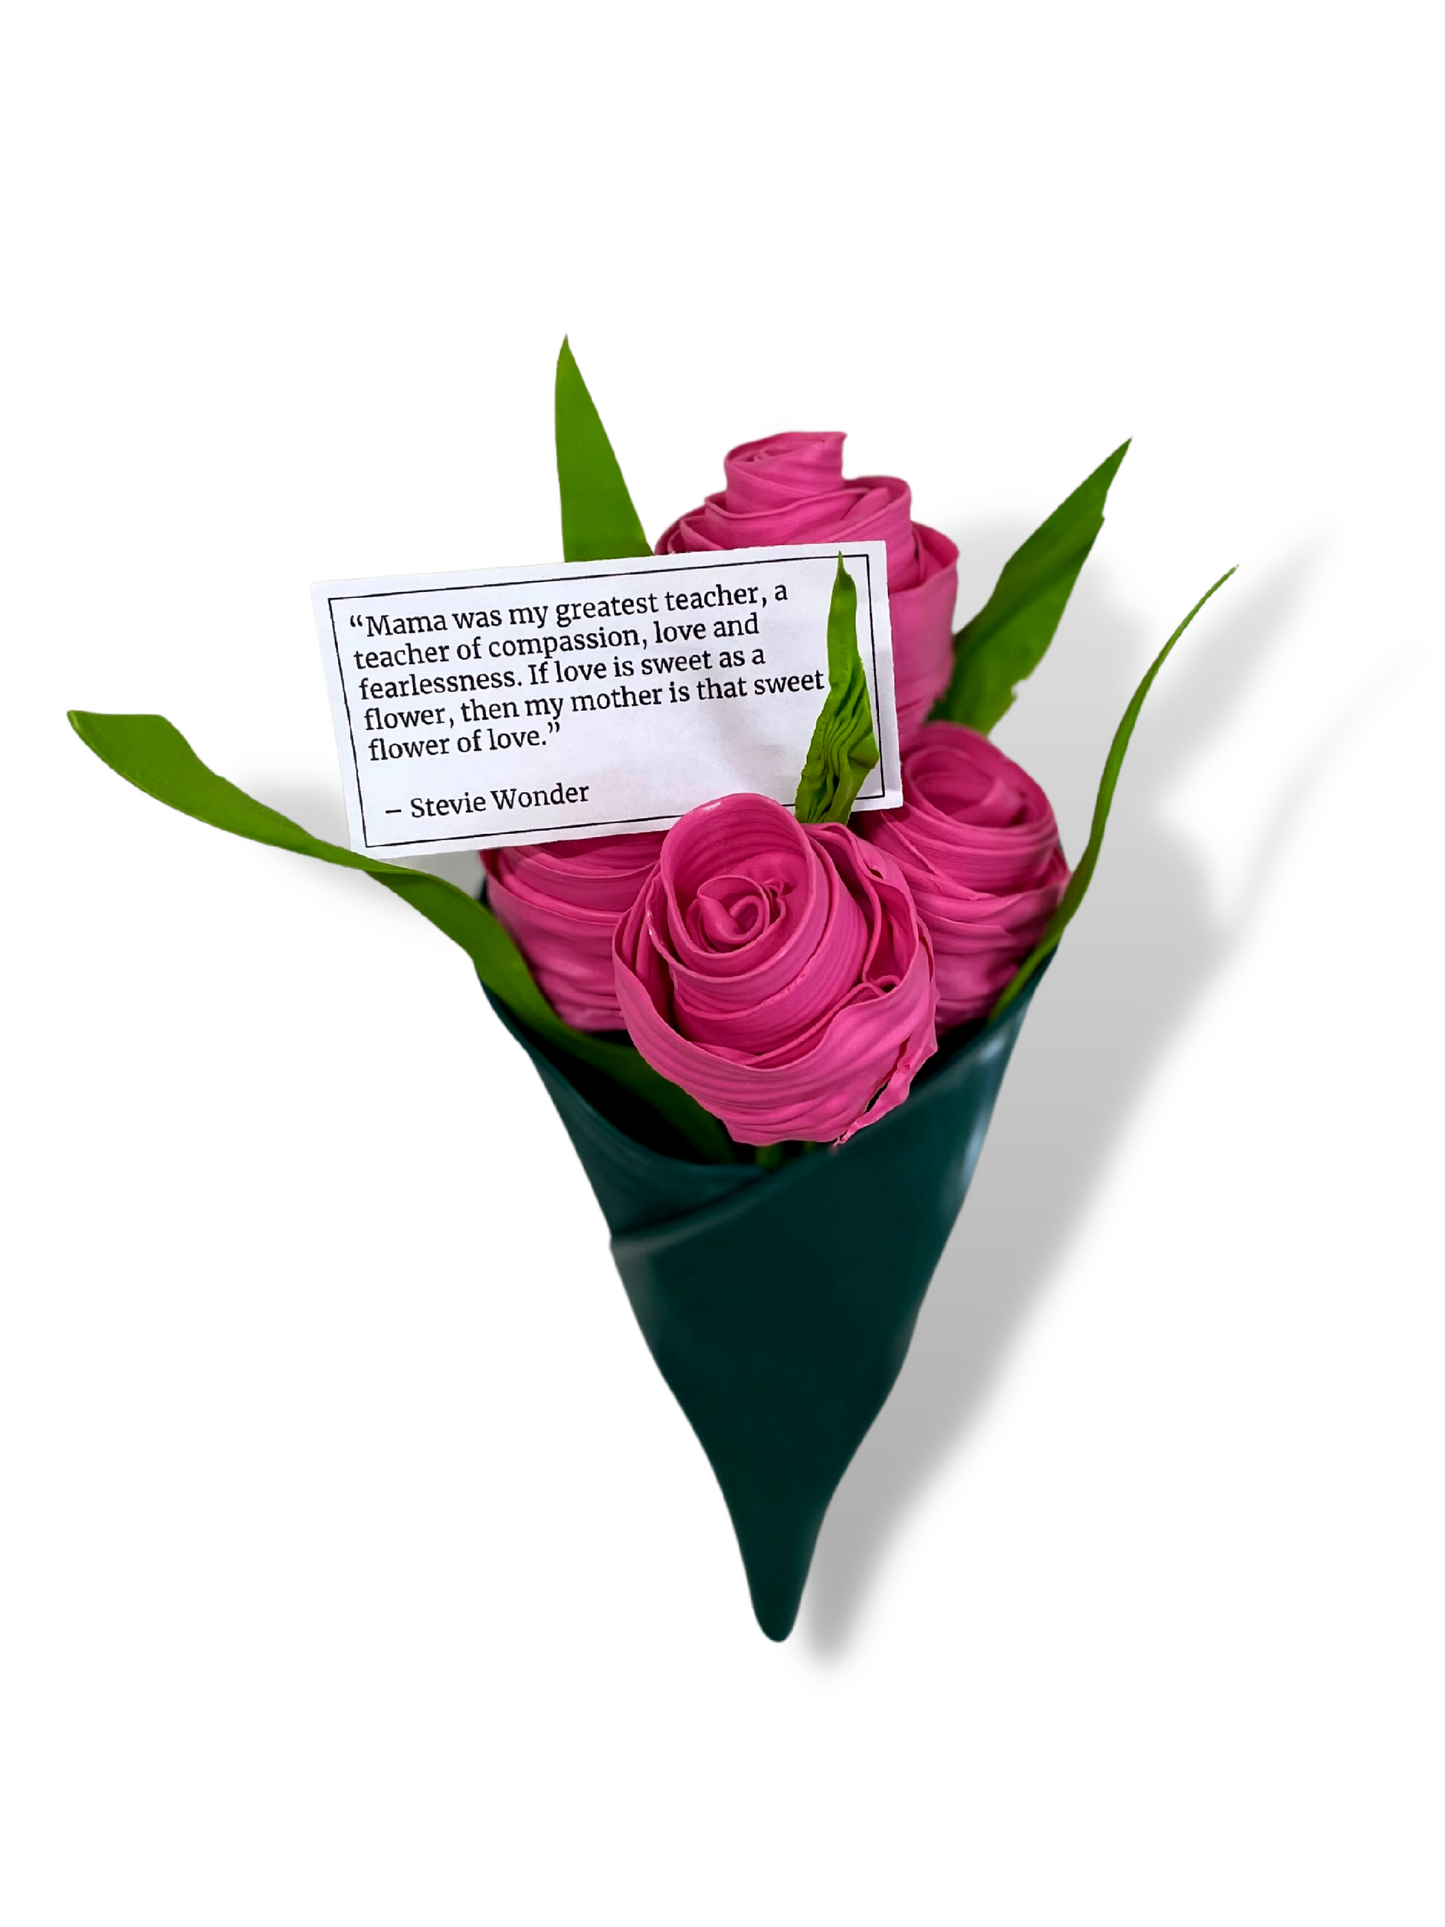 LIMITED EDITION Recycled Vinyl Flower Bouquet - Mother's Day